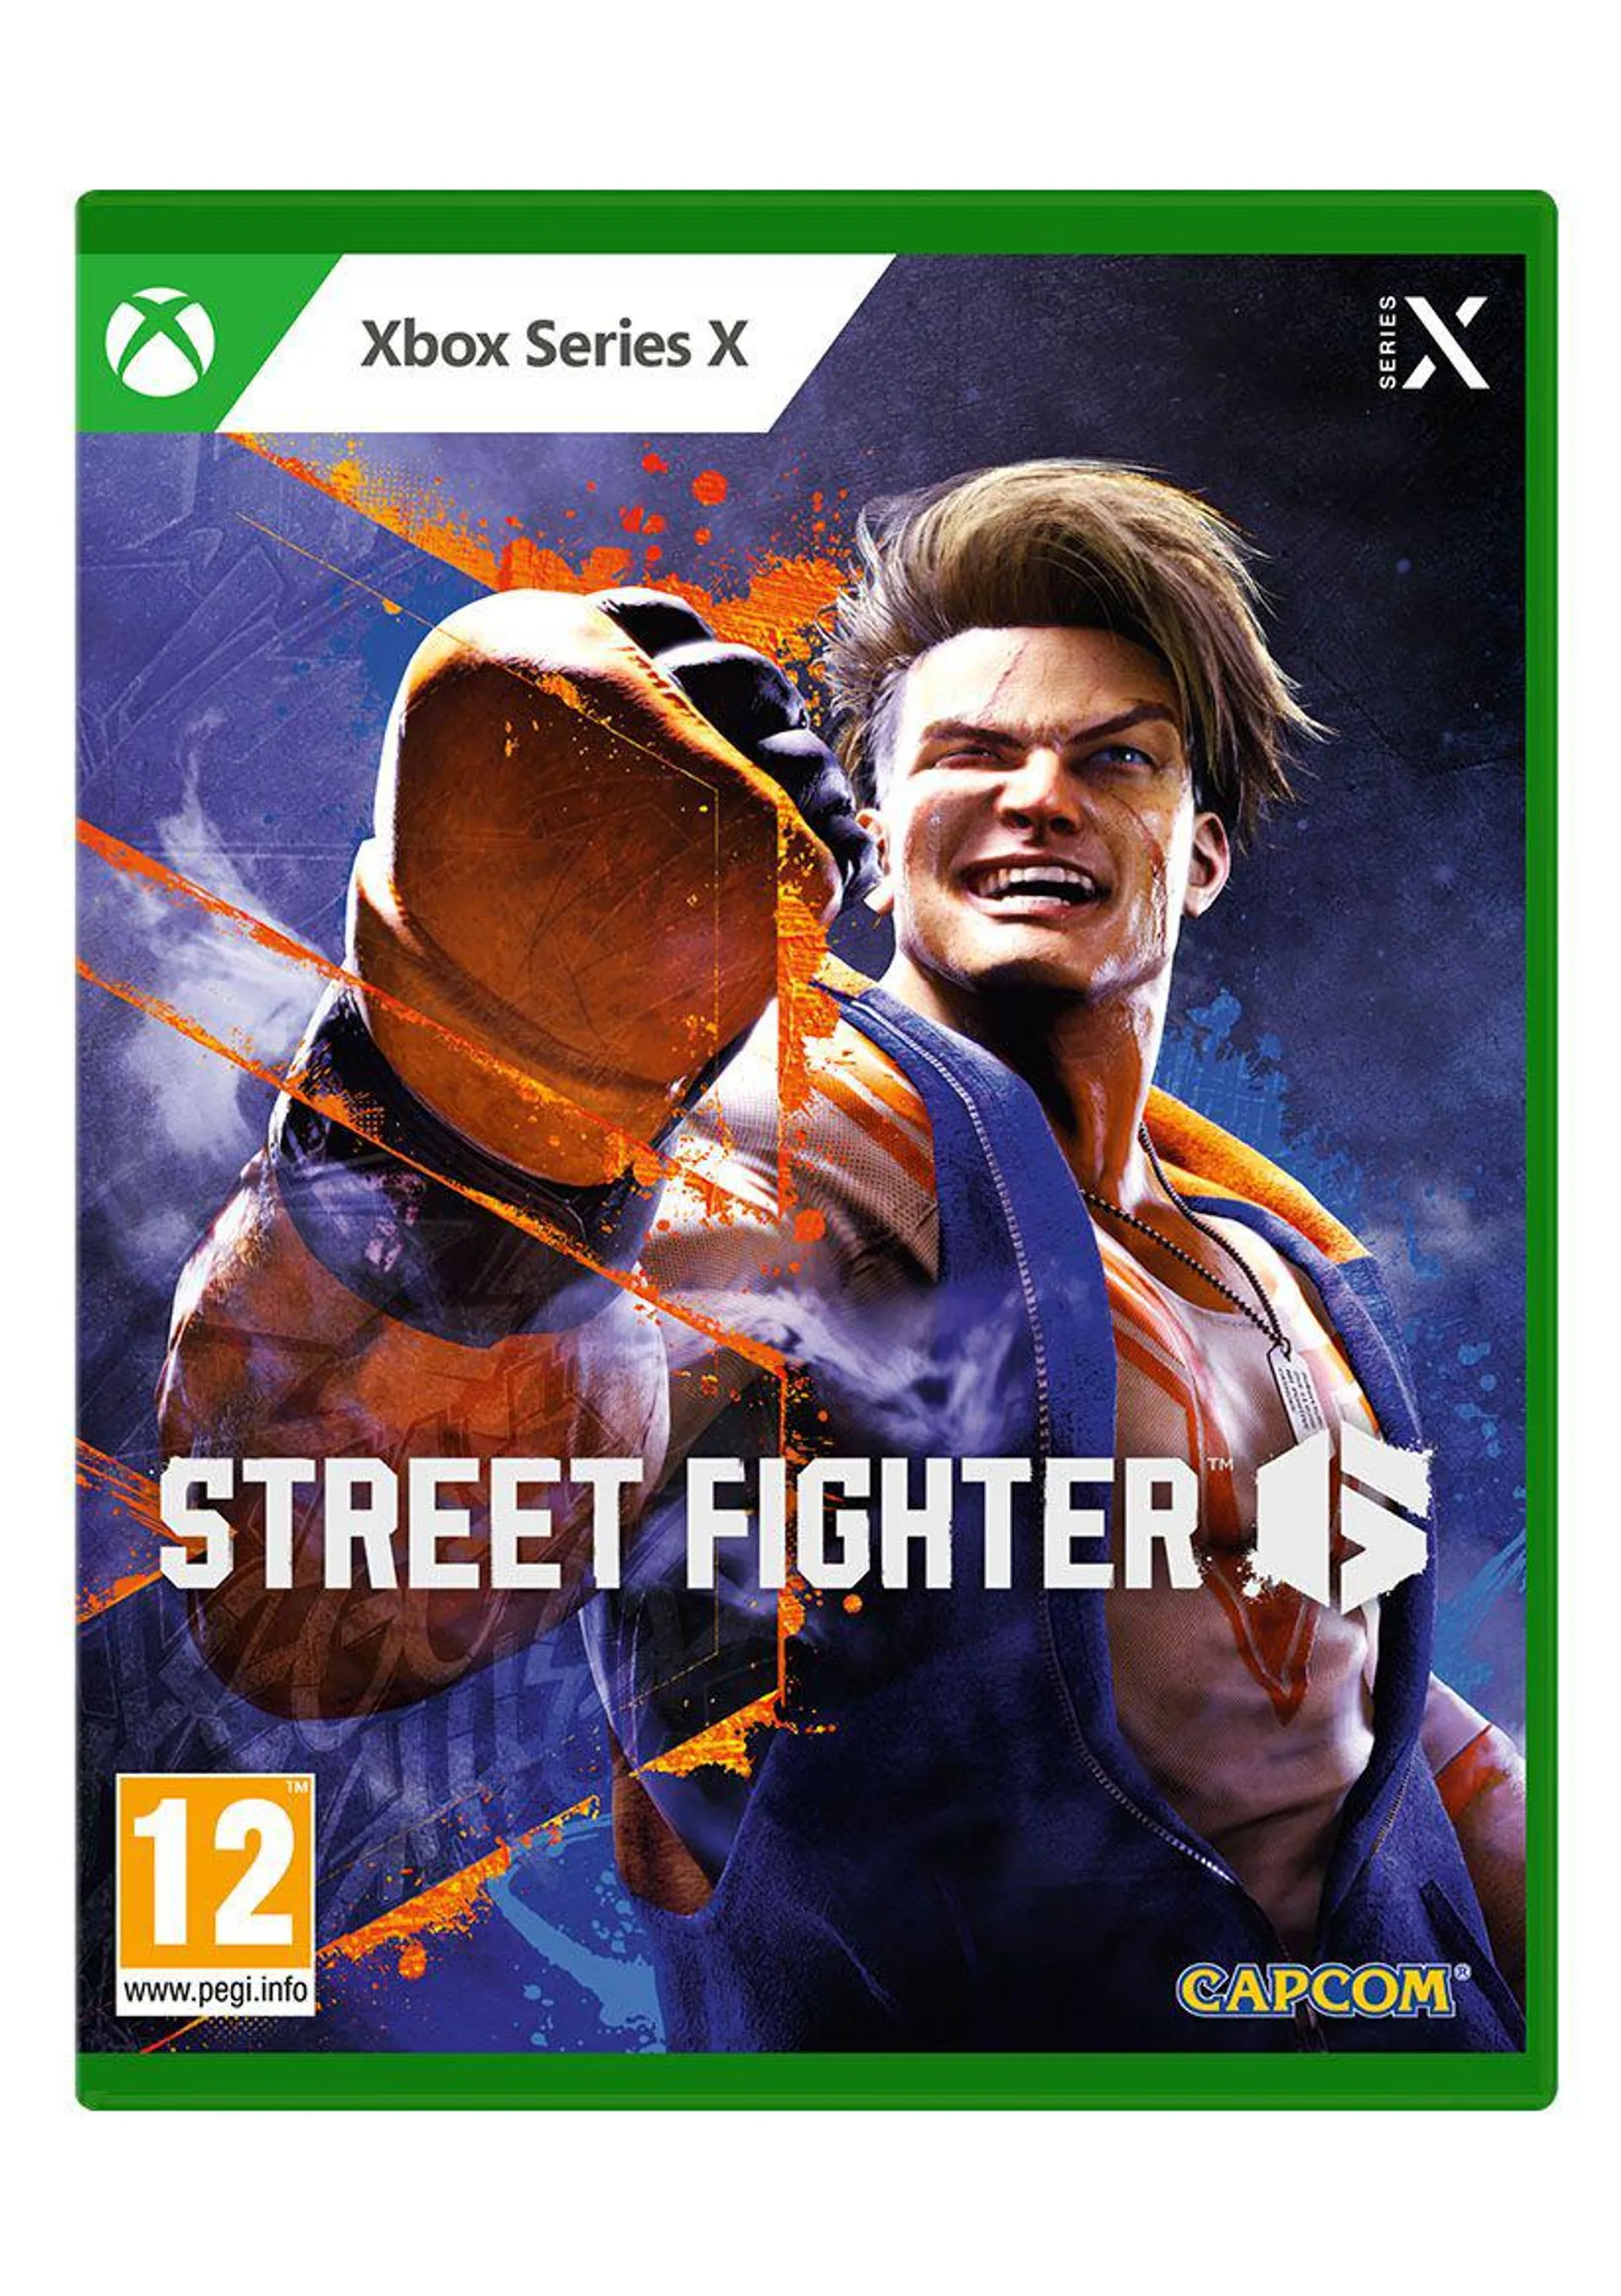 Street Fighter 6 on Xbox Series X | S